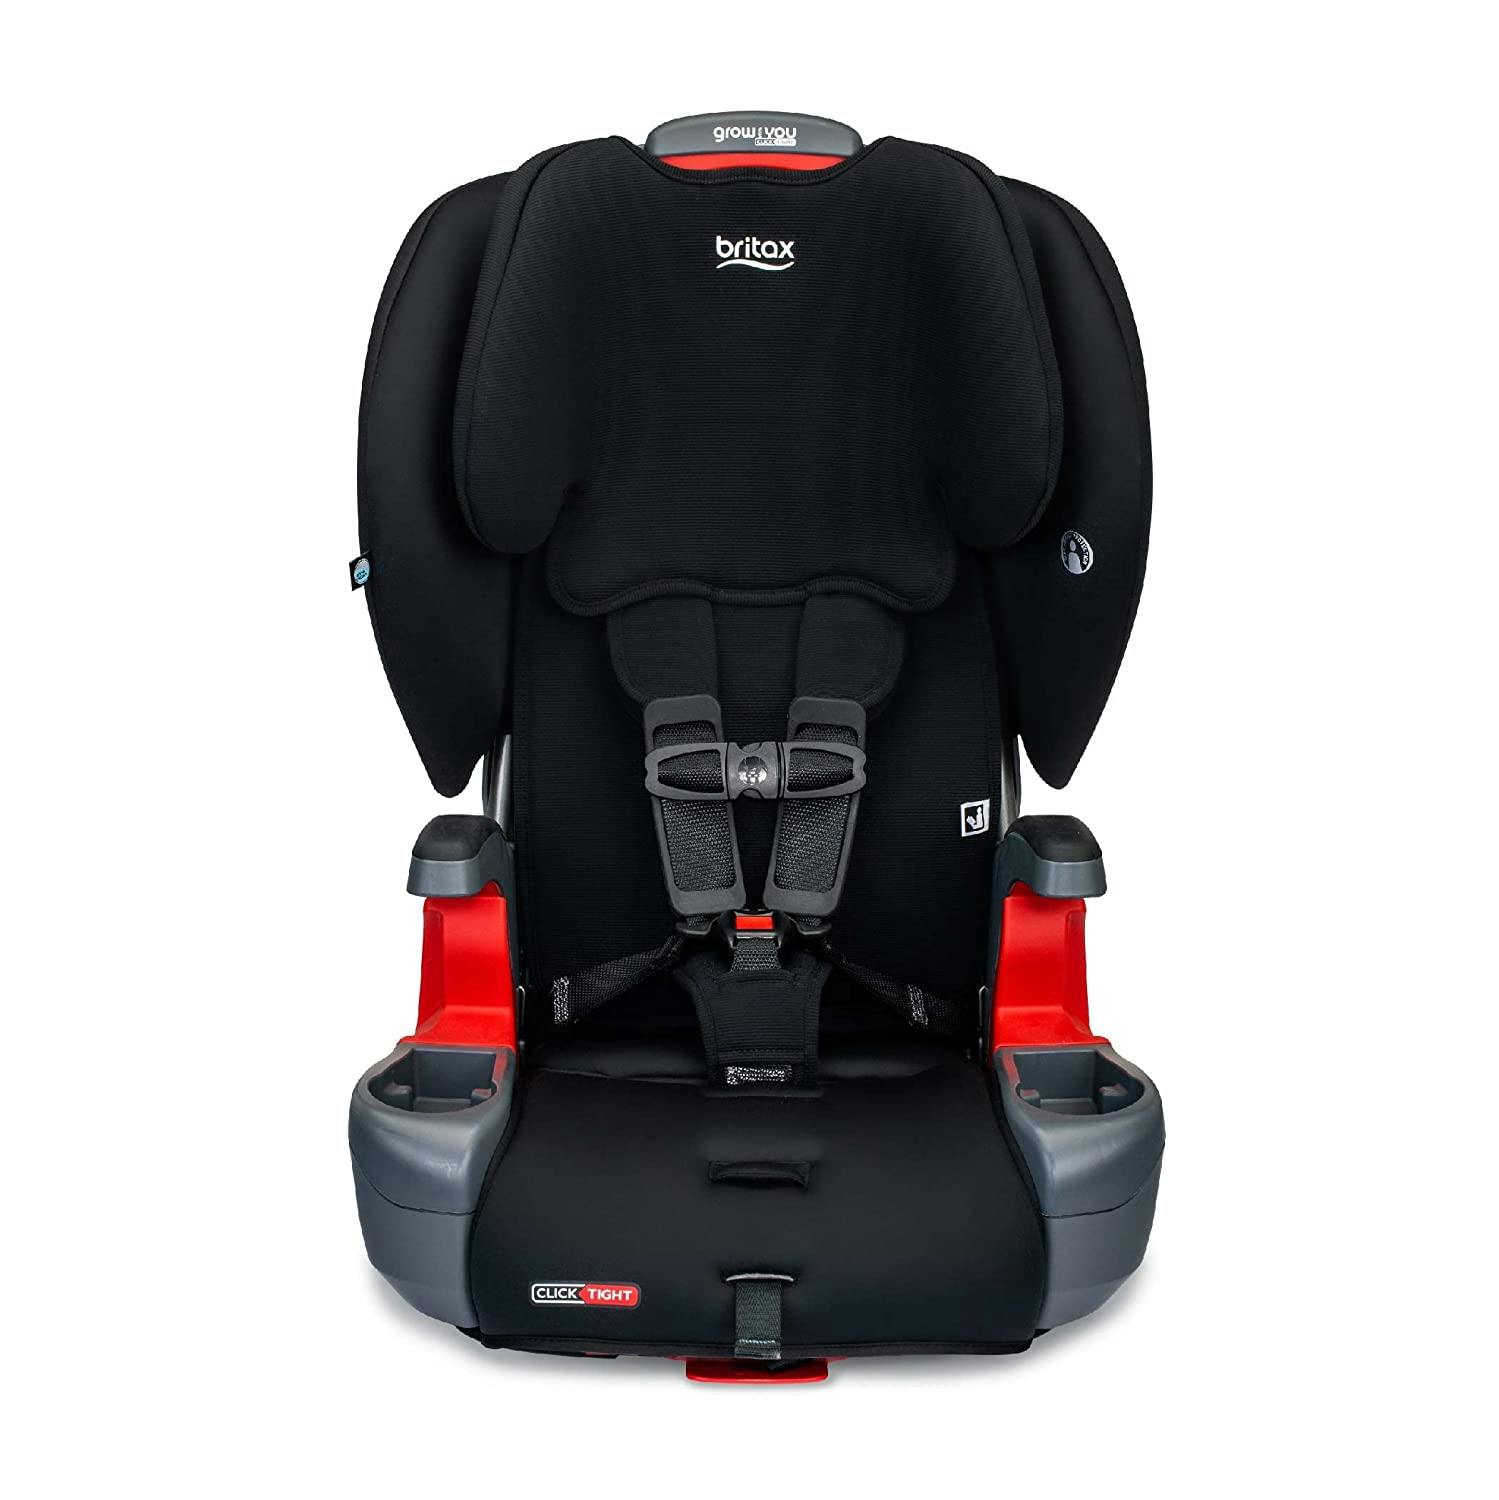 Britax Grow With You ClickTight Harness-2-Booster Car Seat · Black Contour Safewash